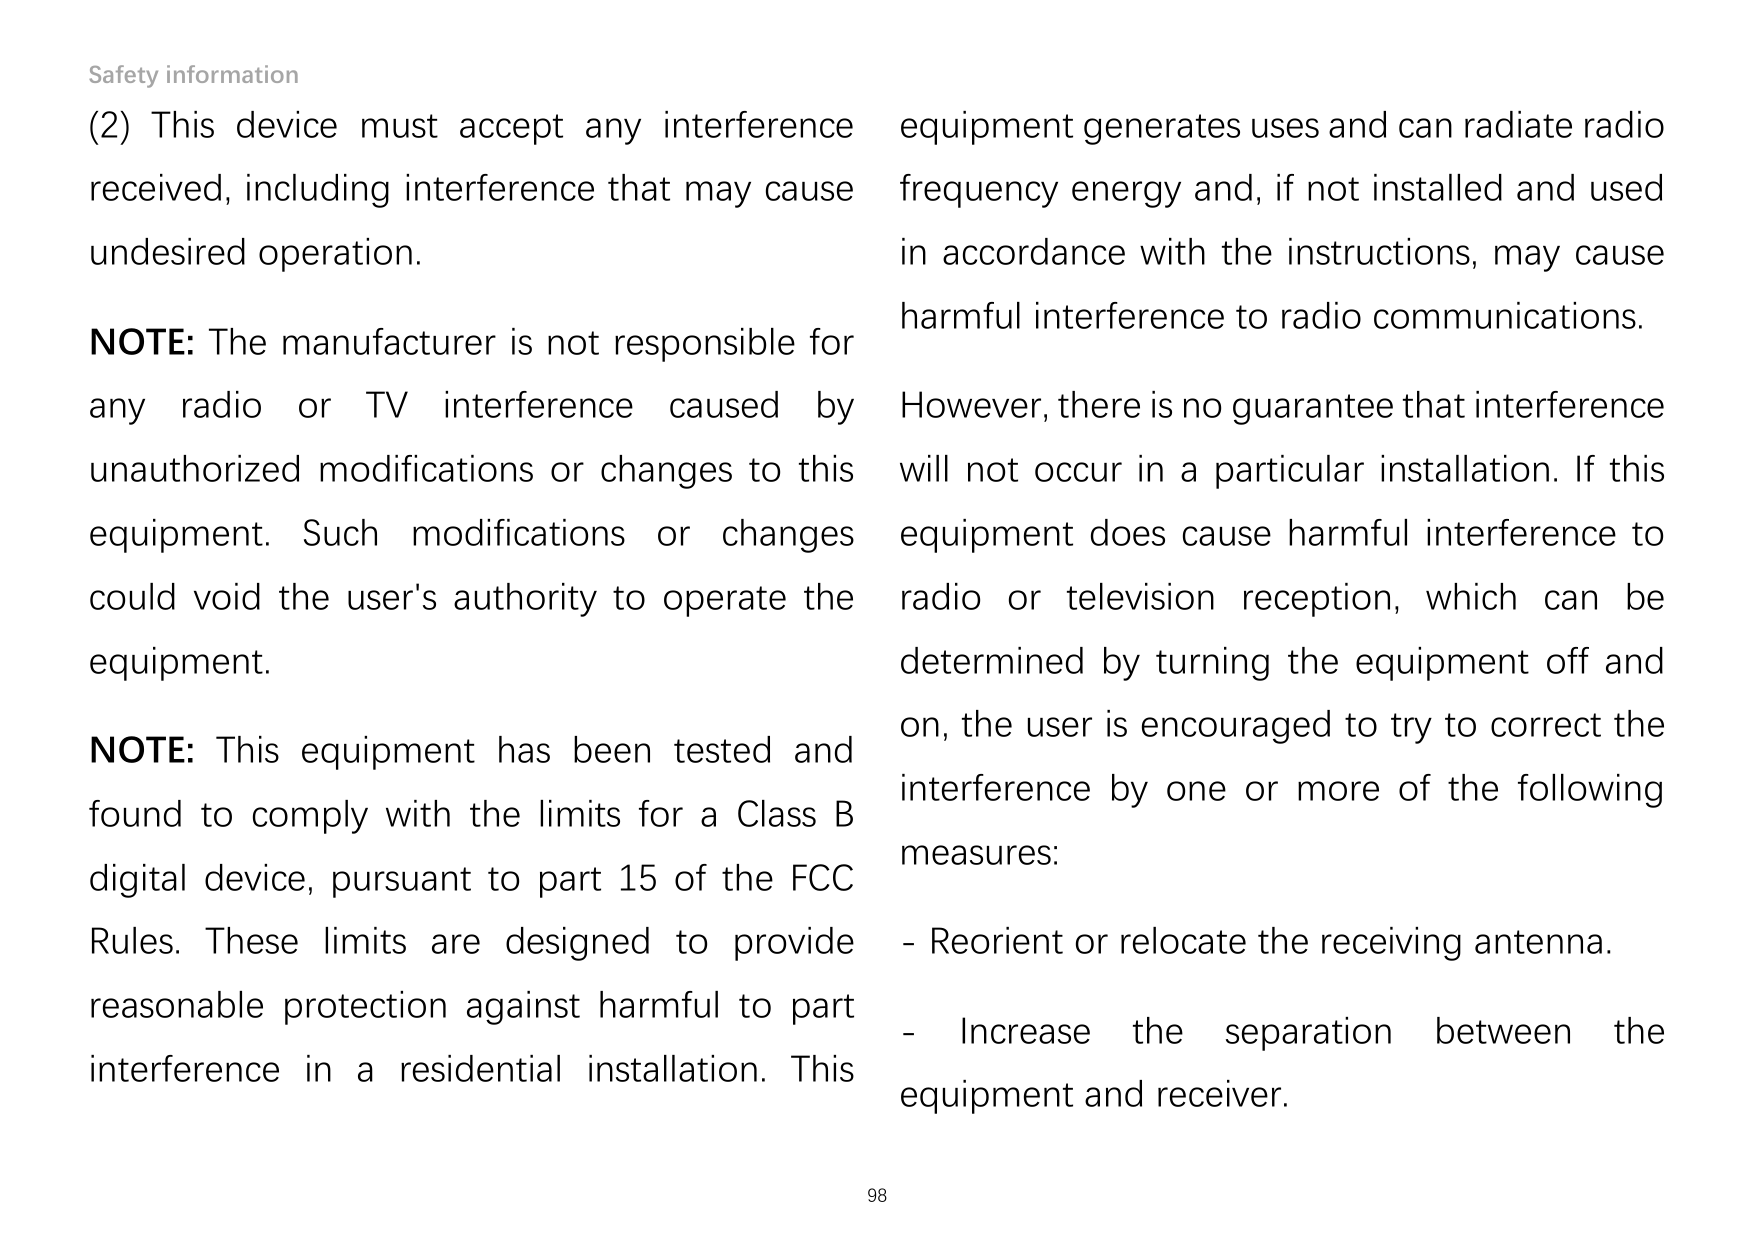 Safety information(2) This device must accept any interferenceequipment generates uses and can radiate radioreceived, including 